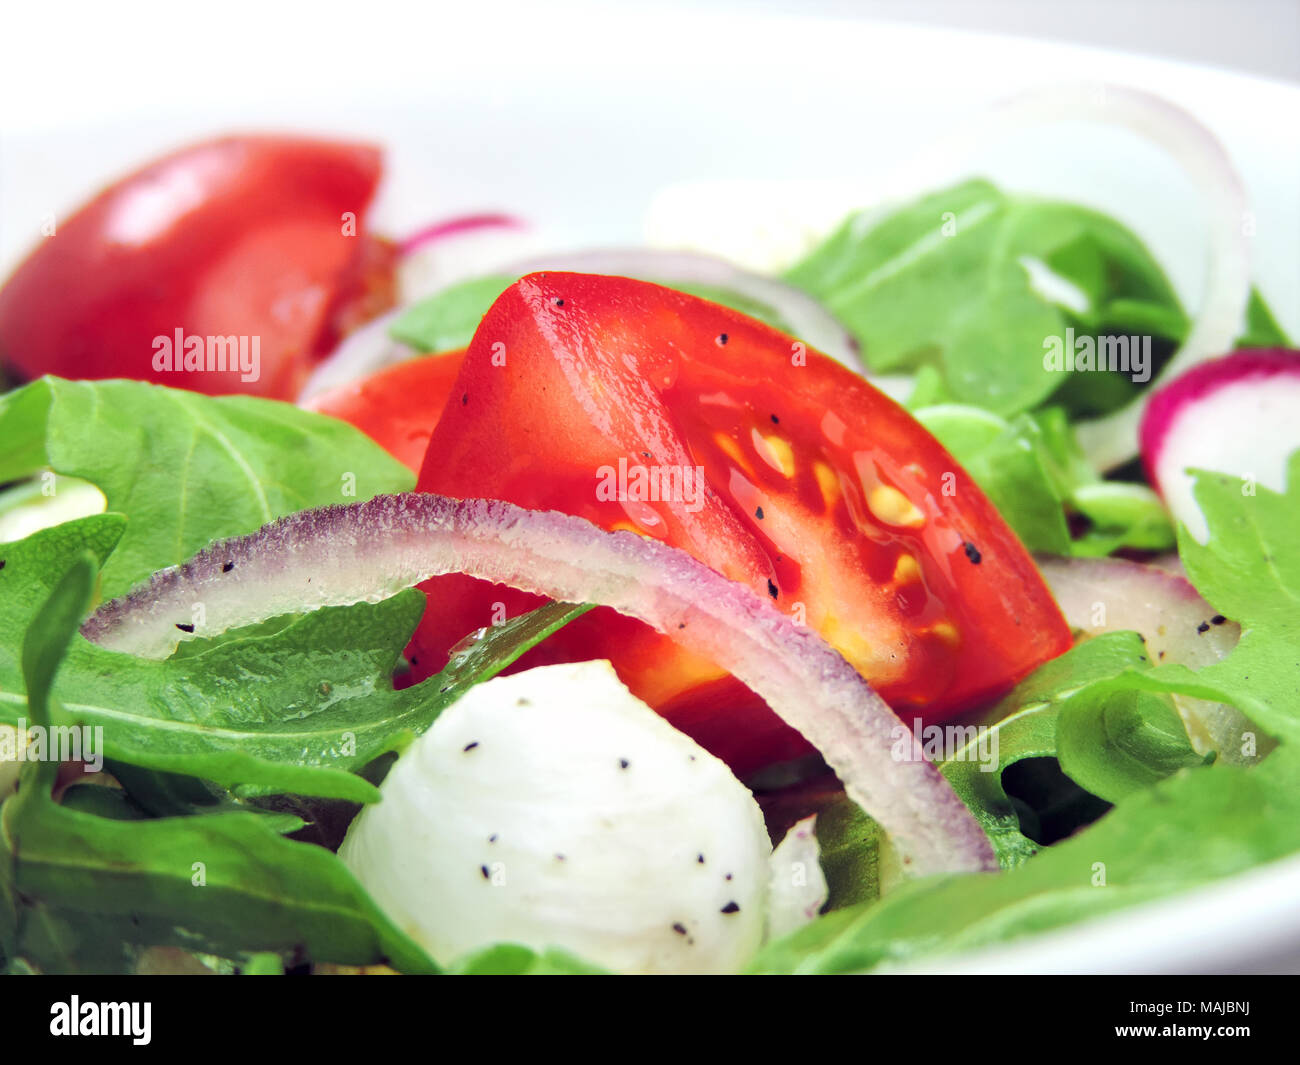 Gourmet salad or fresh Caprese salad with tomatoes, red onions, rocket and mozzarella cheese on a white plate. Close-up shot of fresh salad. Stock Photo